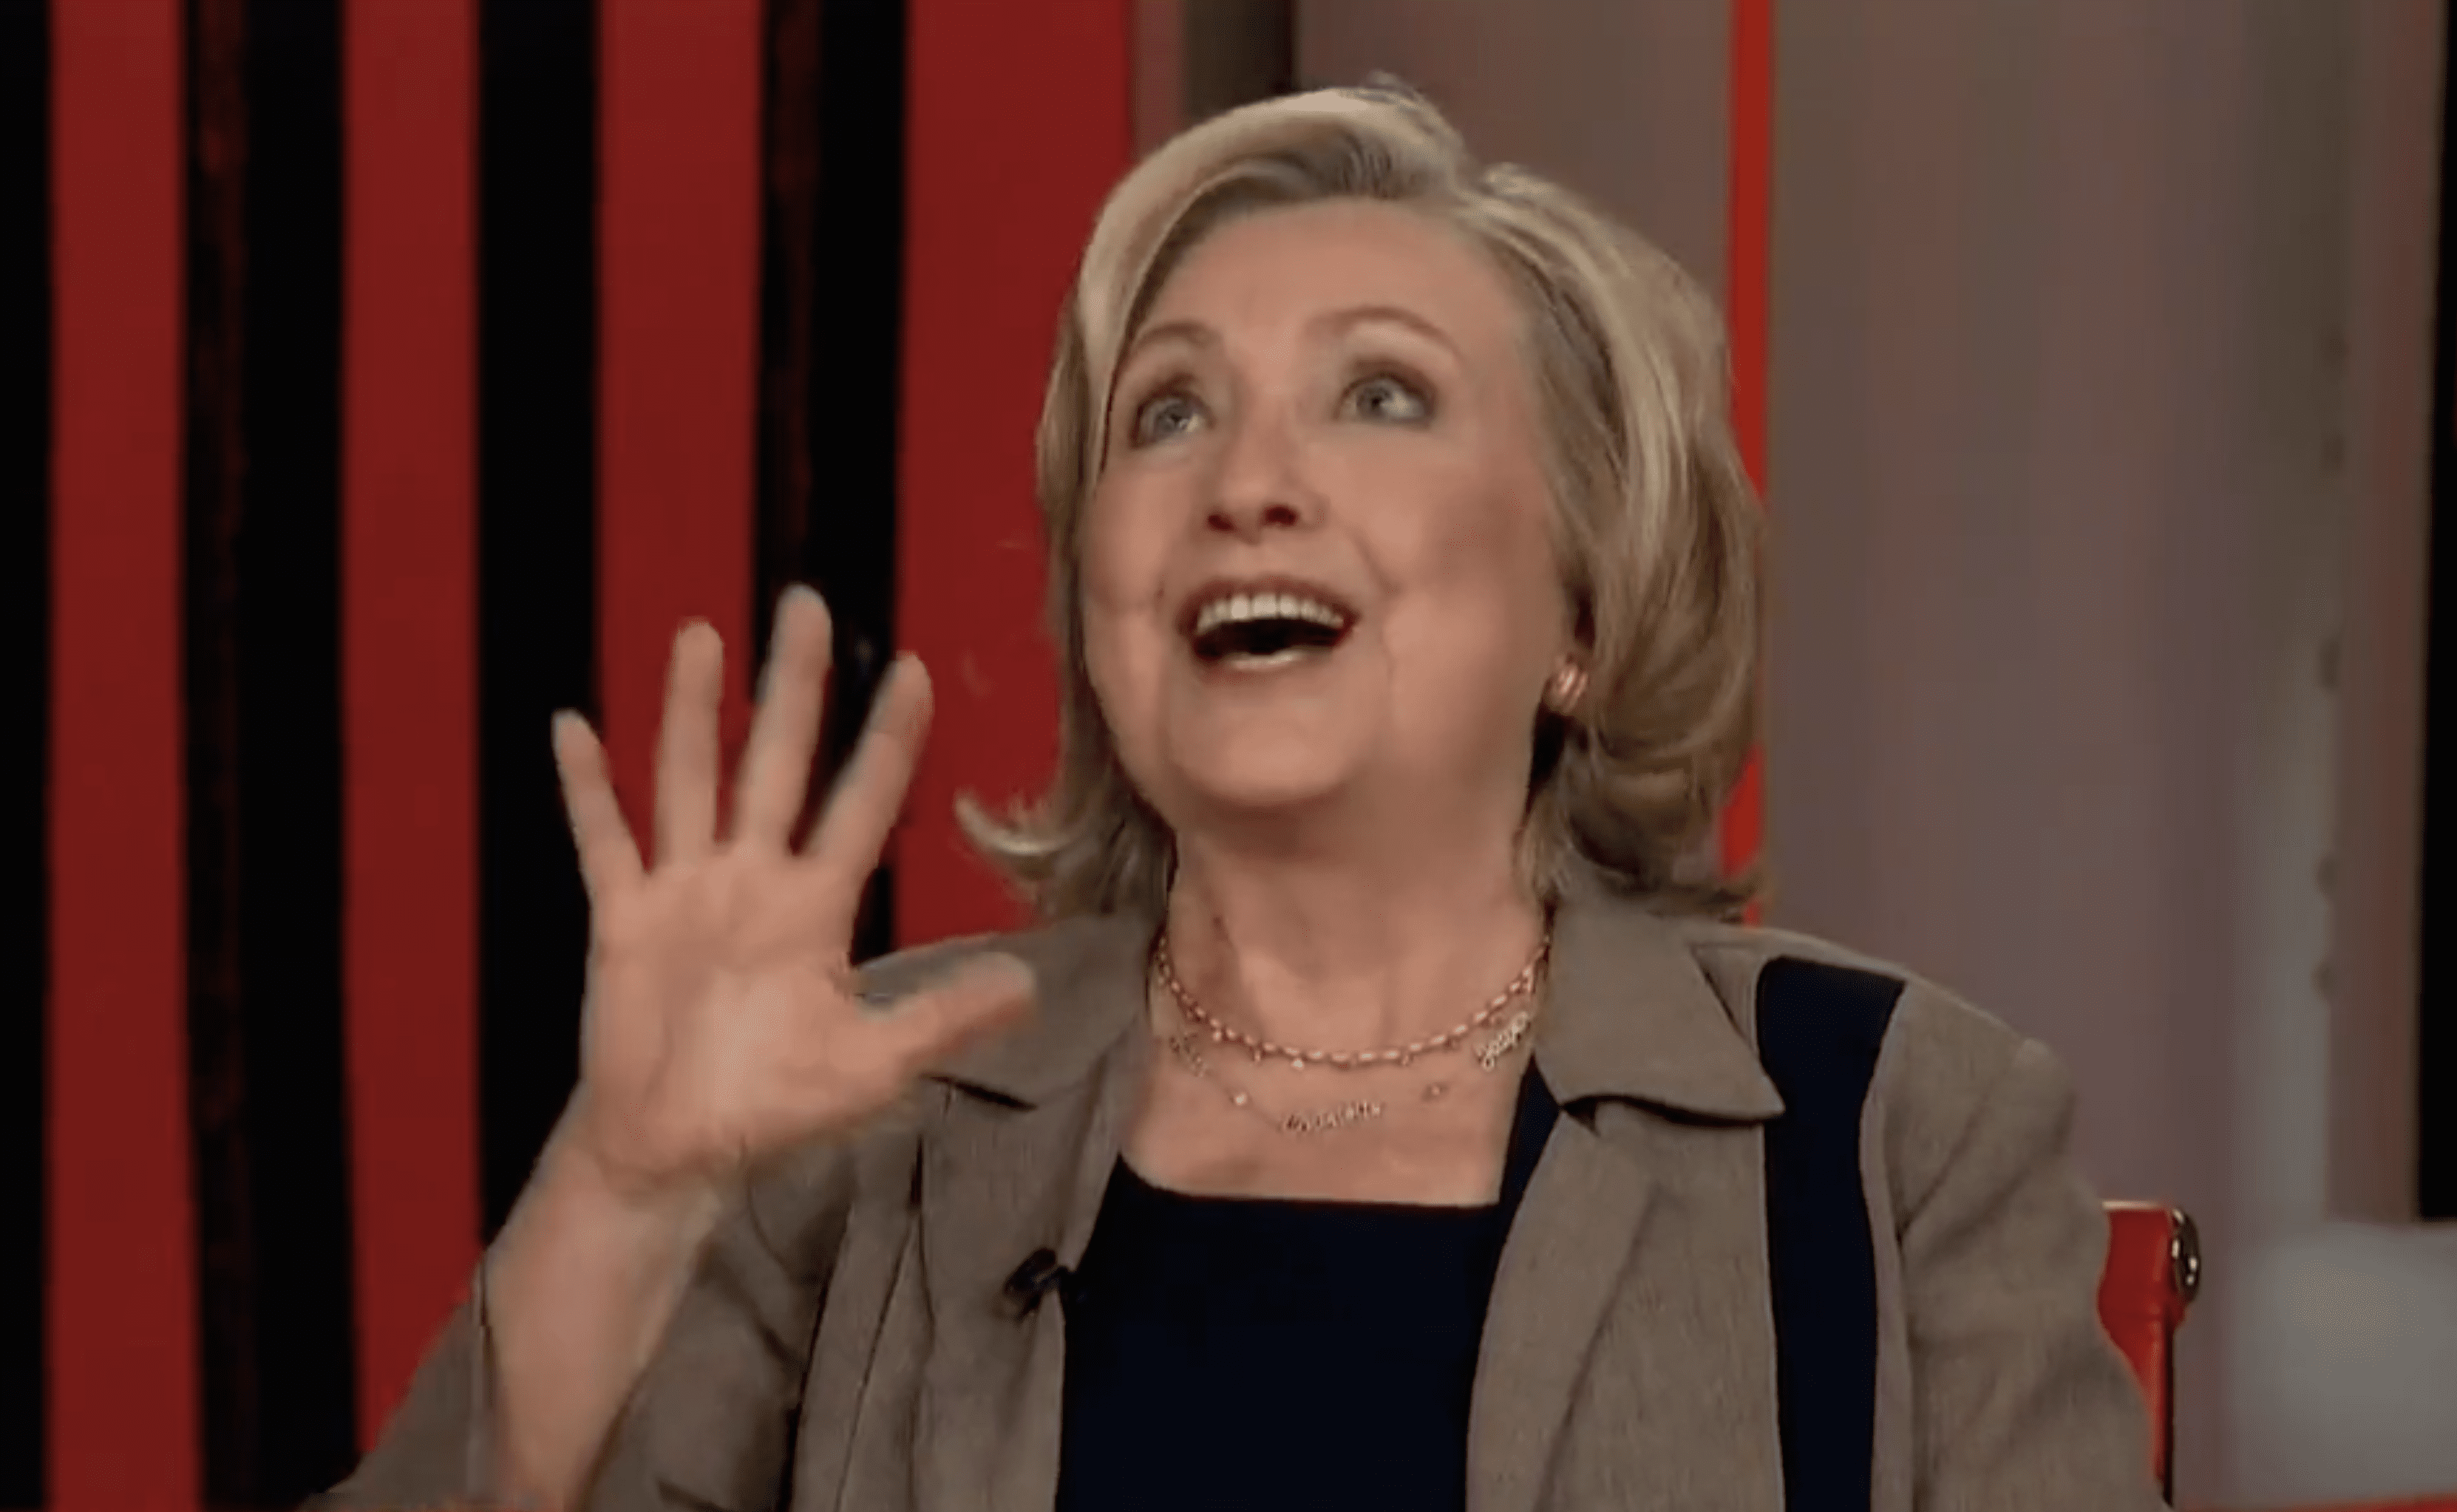 HILARIOUS: Hillary Clinton Accuses Trump of Engaging in Projection